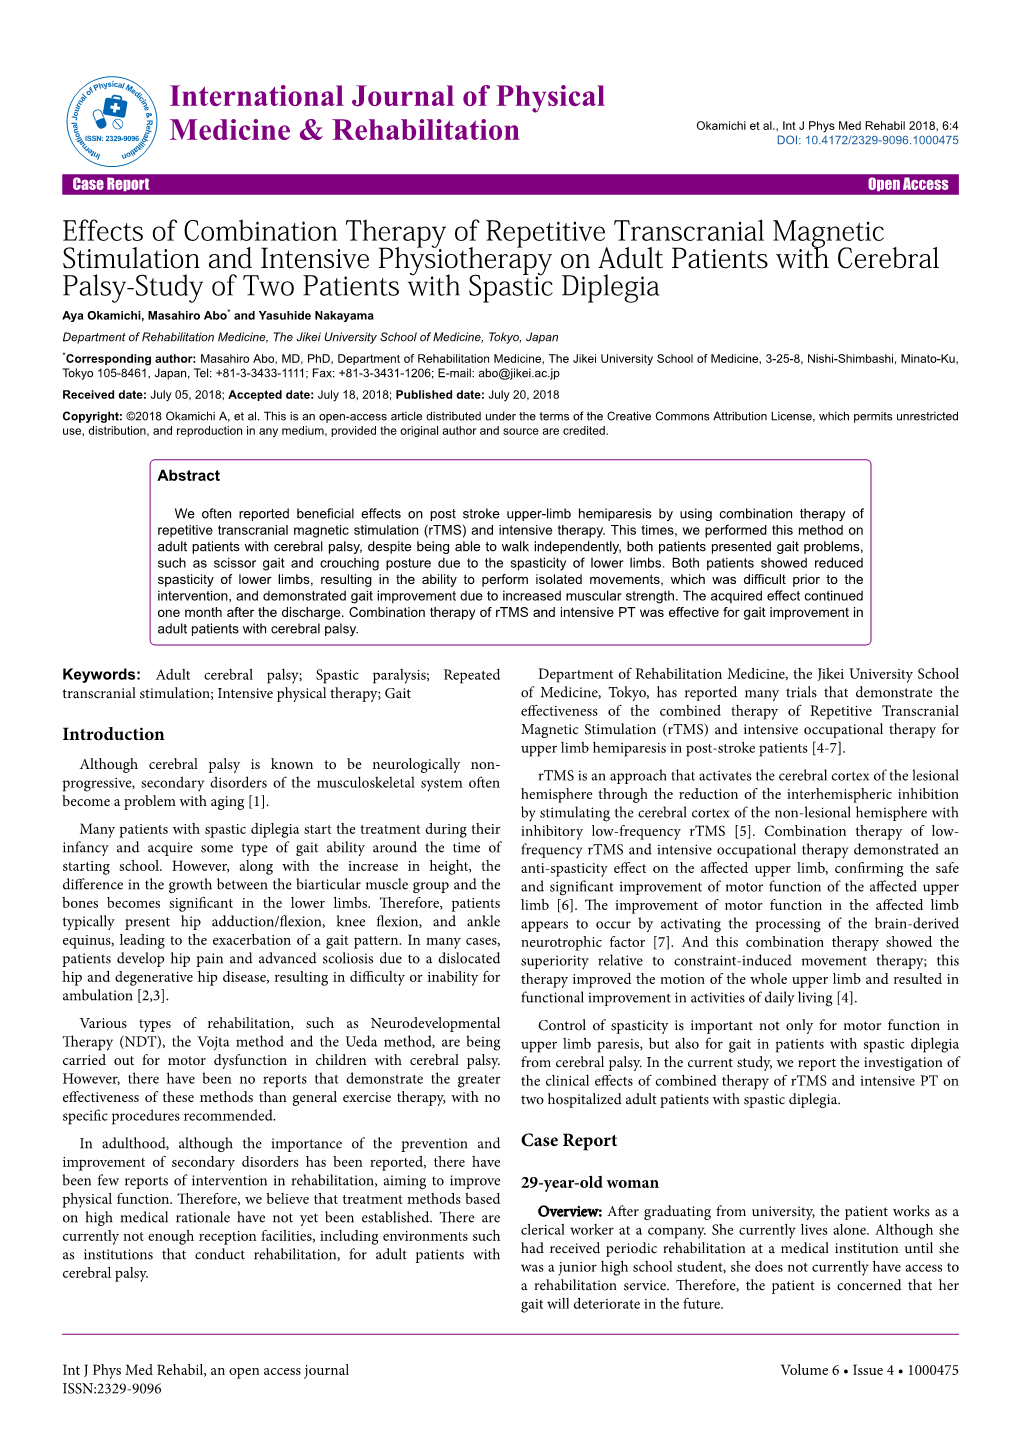 Effects of Combination Therapy of Repetitive Transcranial Magnetic